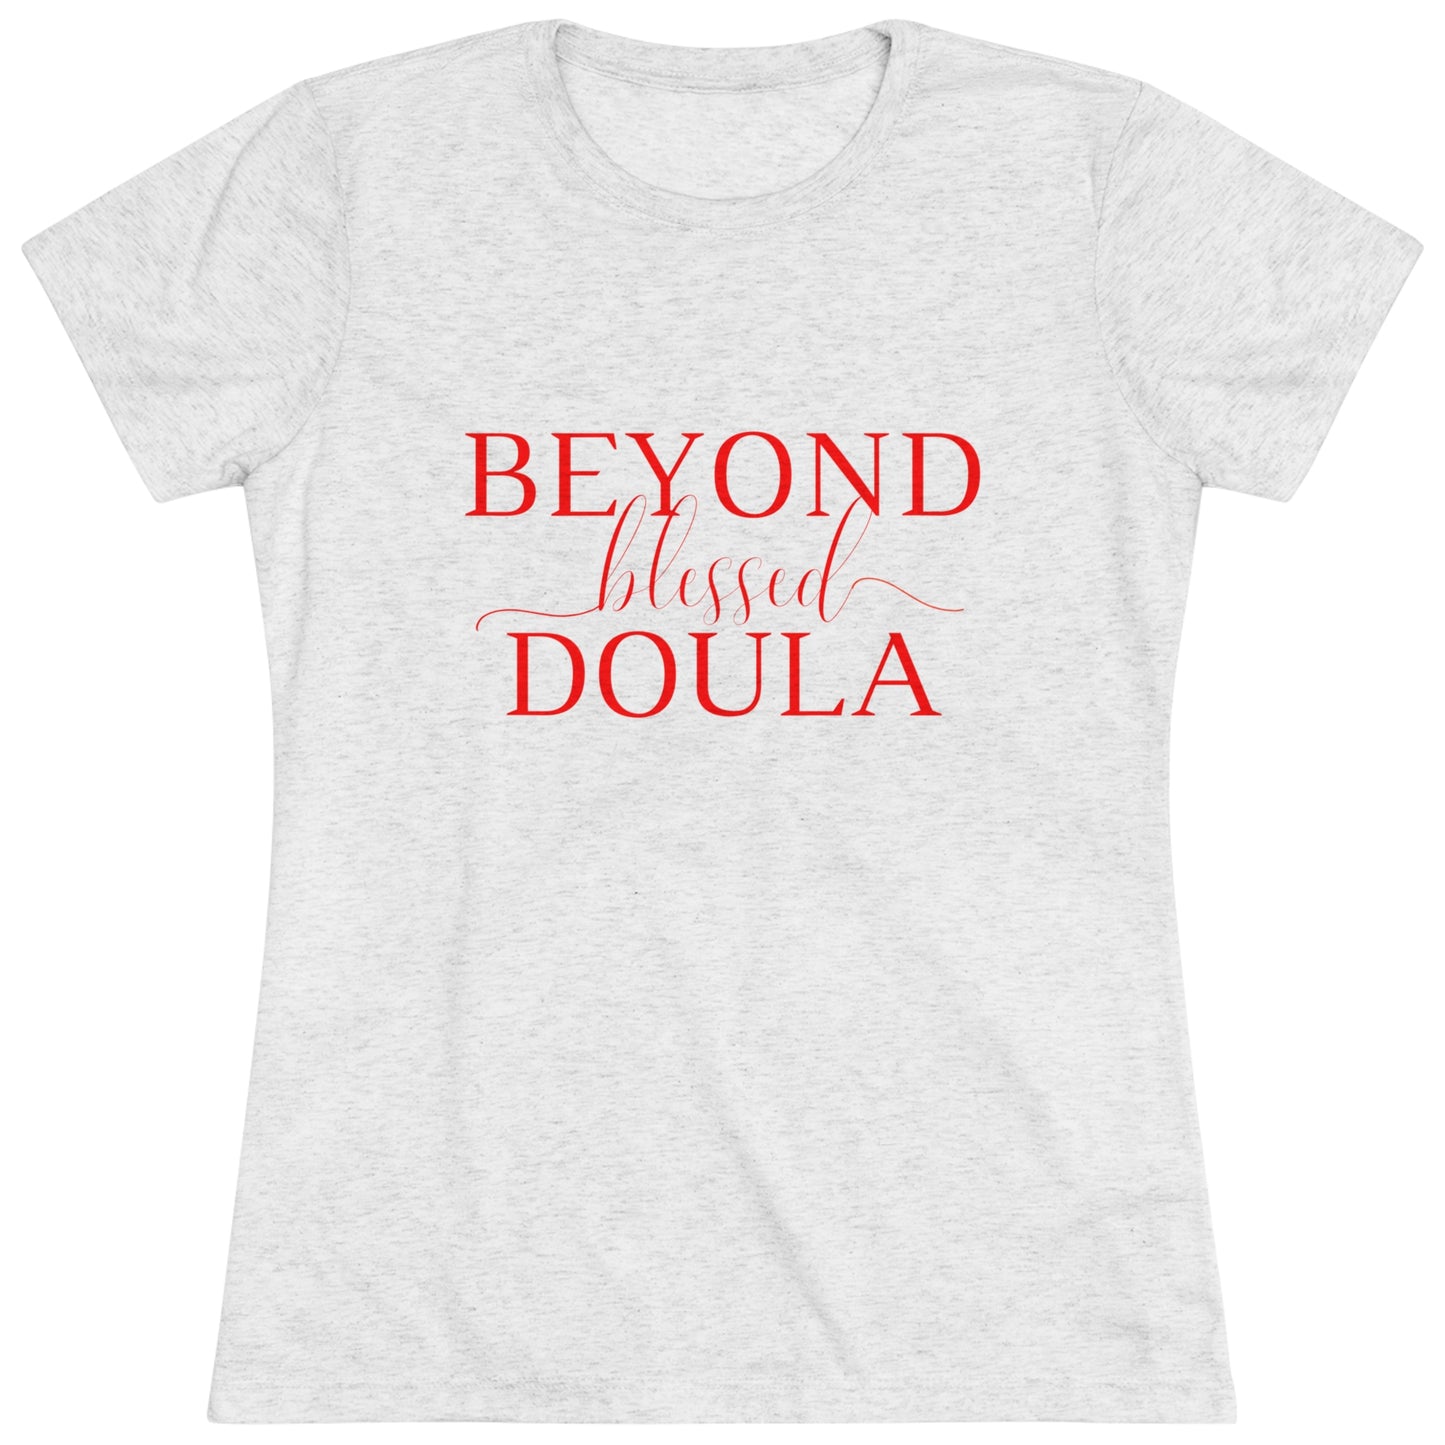 Beyond Blessed Doula - Women's Triblend Tee - Red